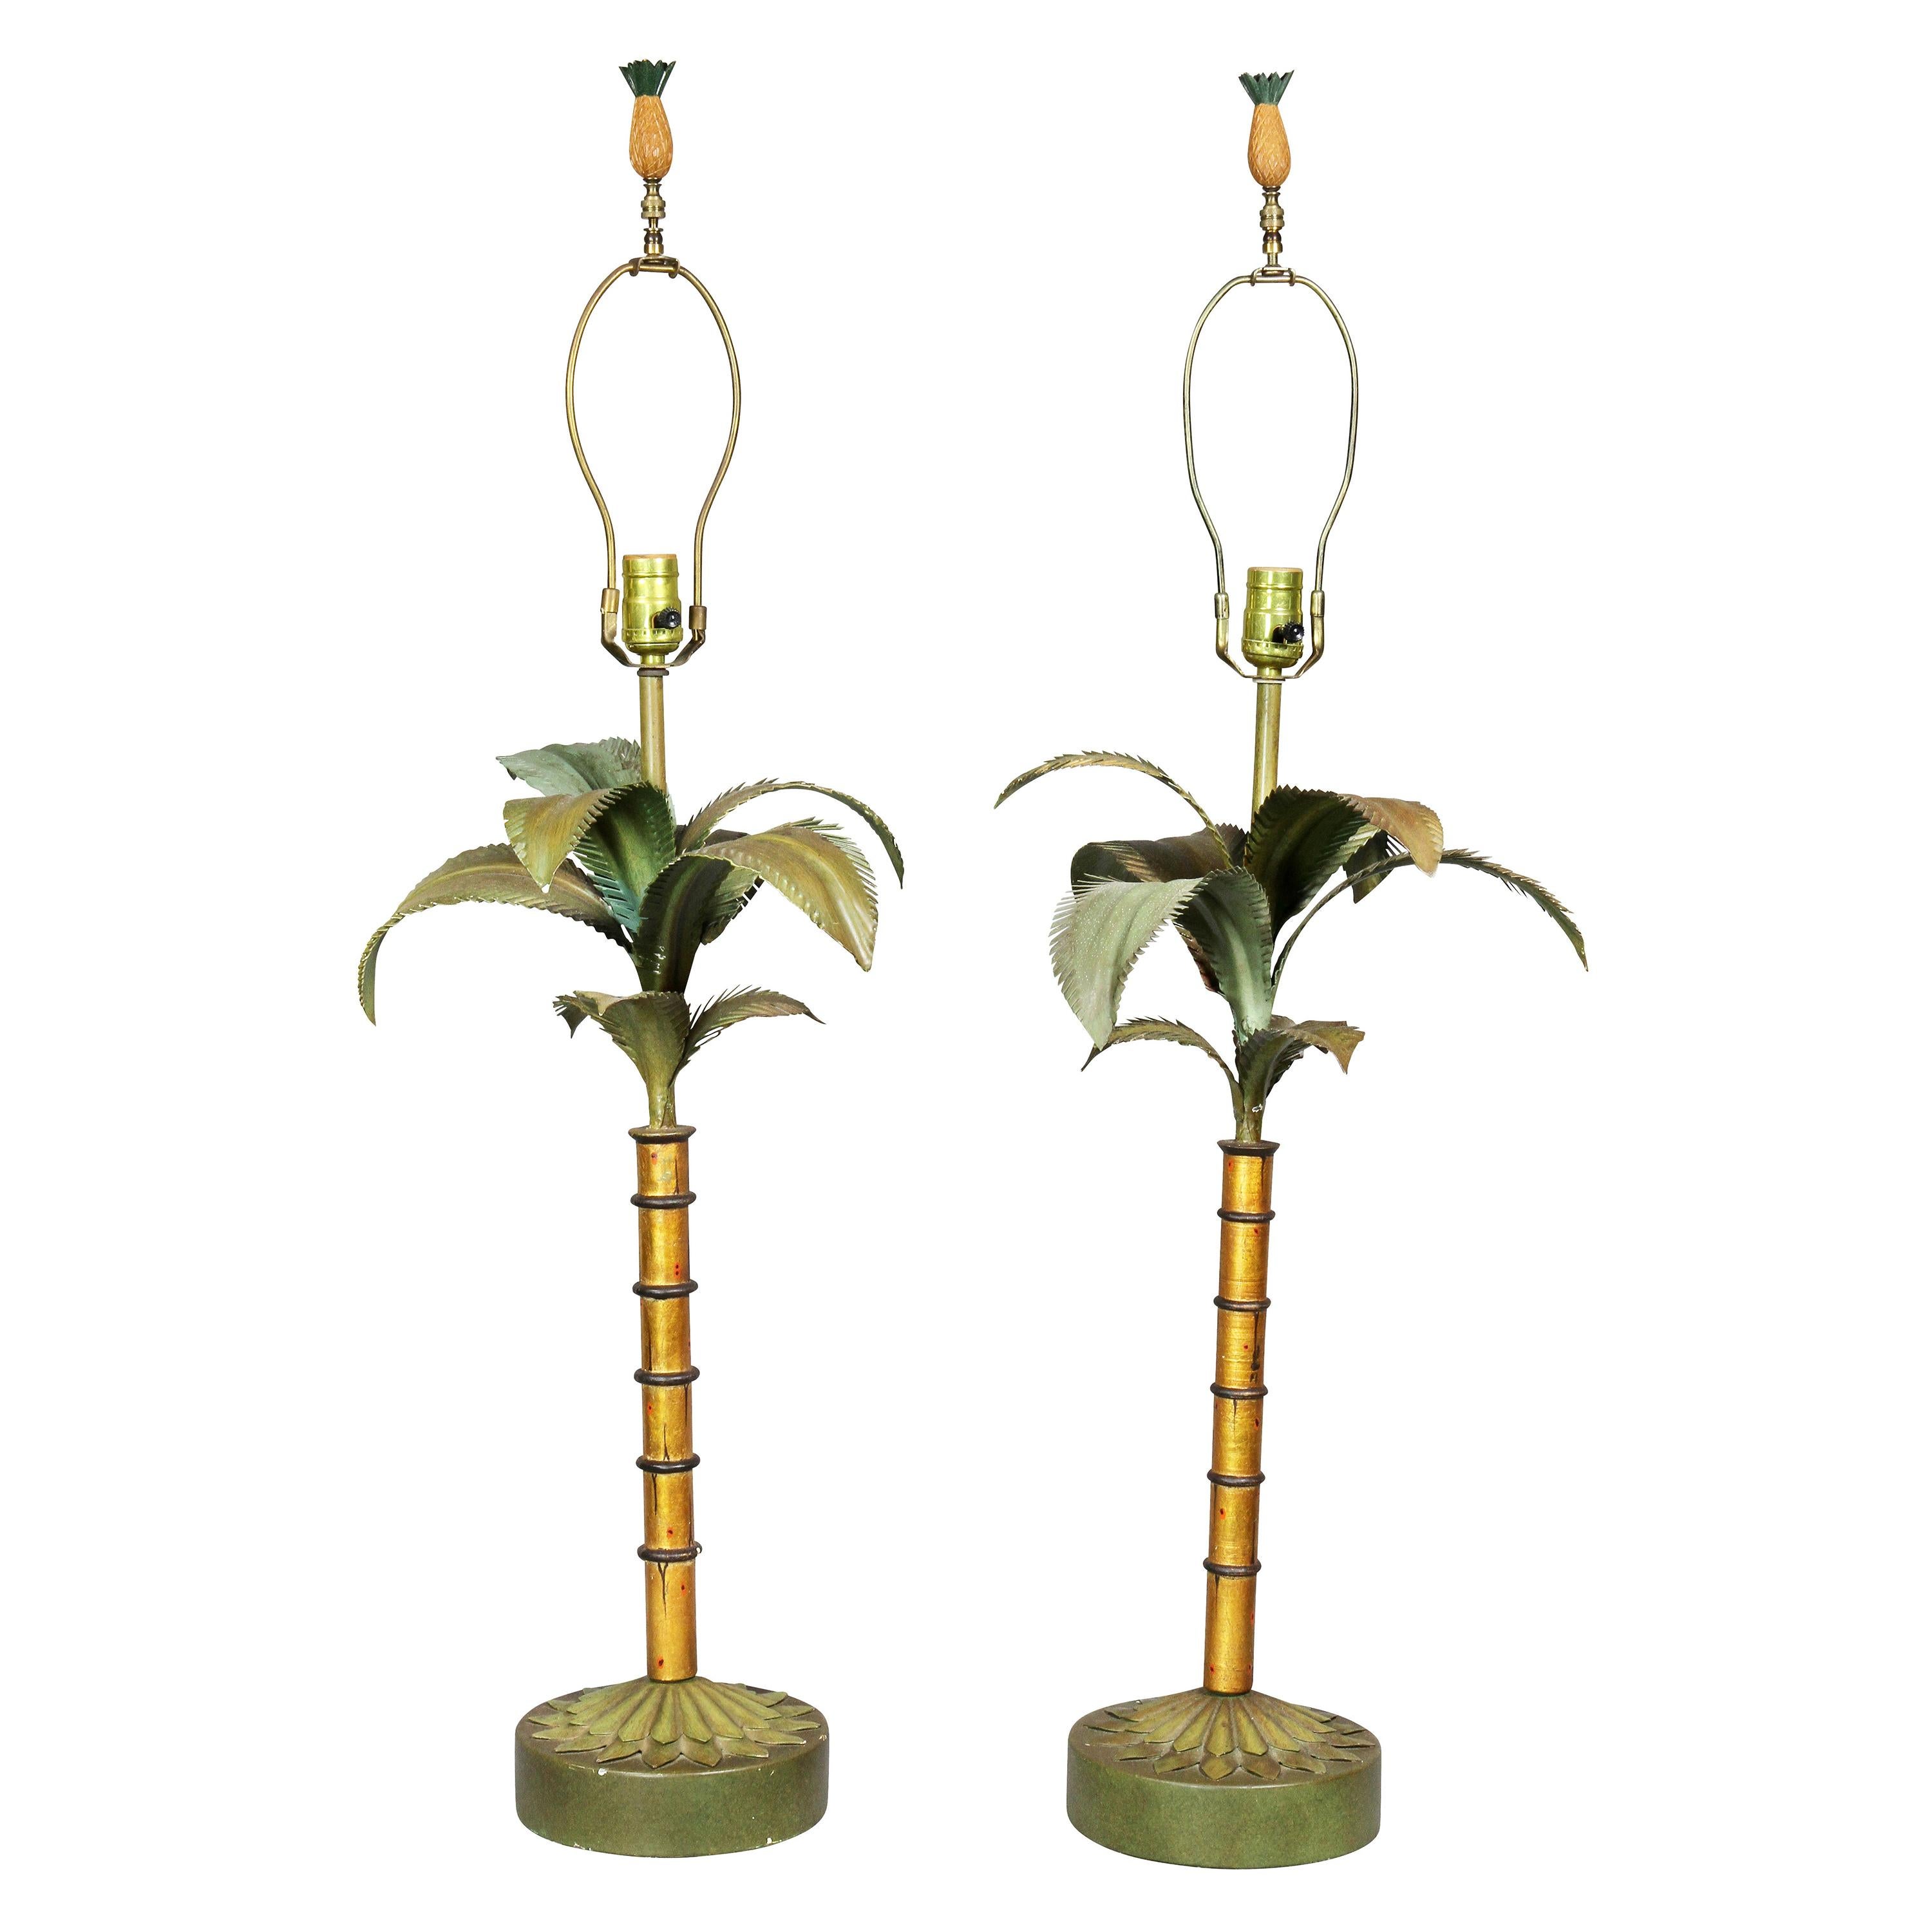 Pair of Tole Palm Tree Table Lamps